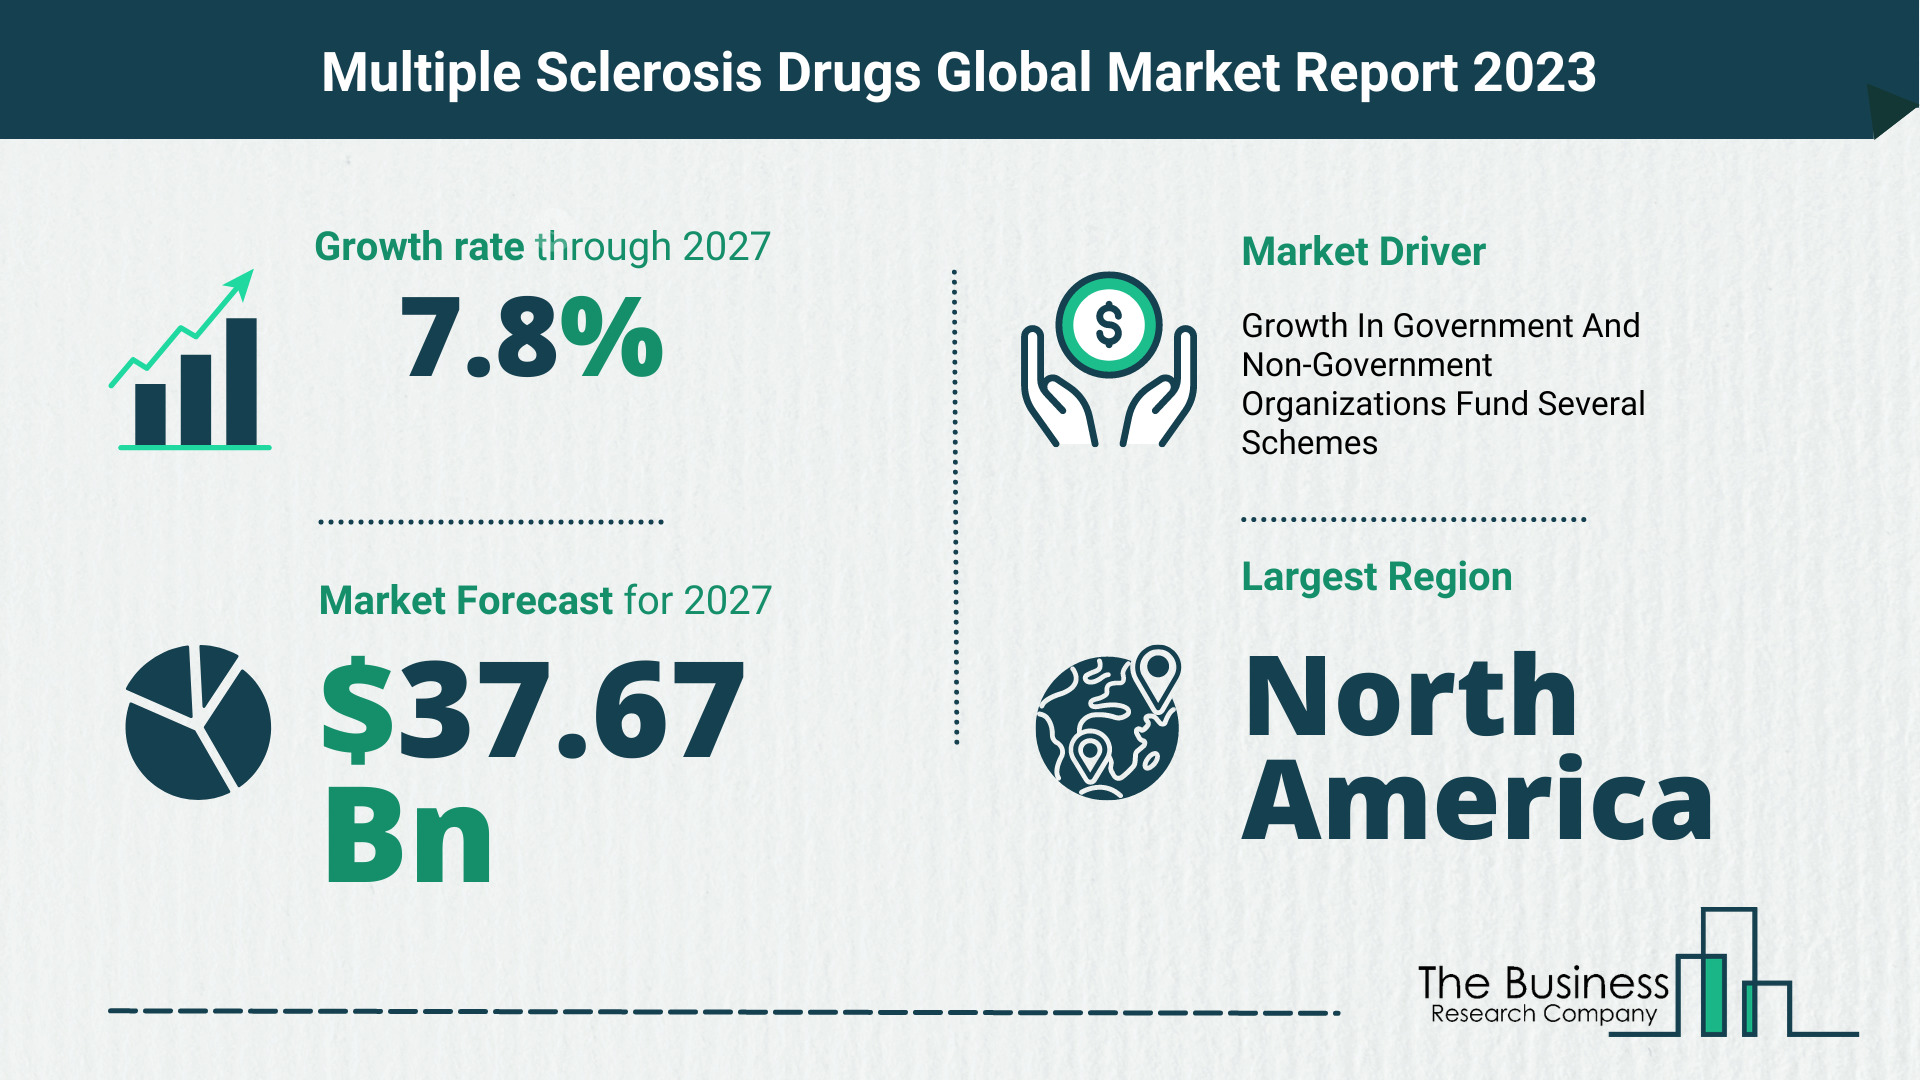 How Will The Multiple Sclerosis Drugs Market Globally Expand In 2023?